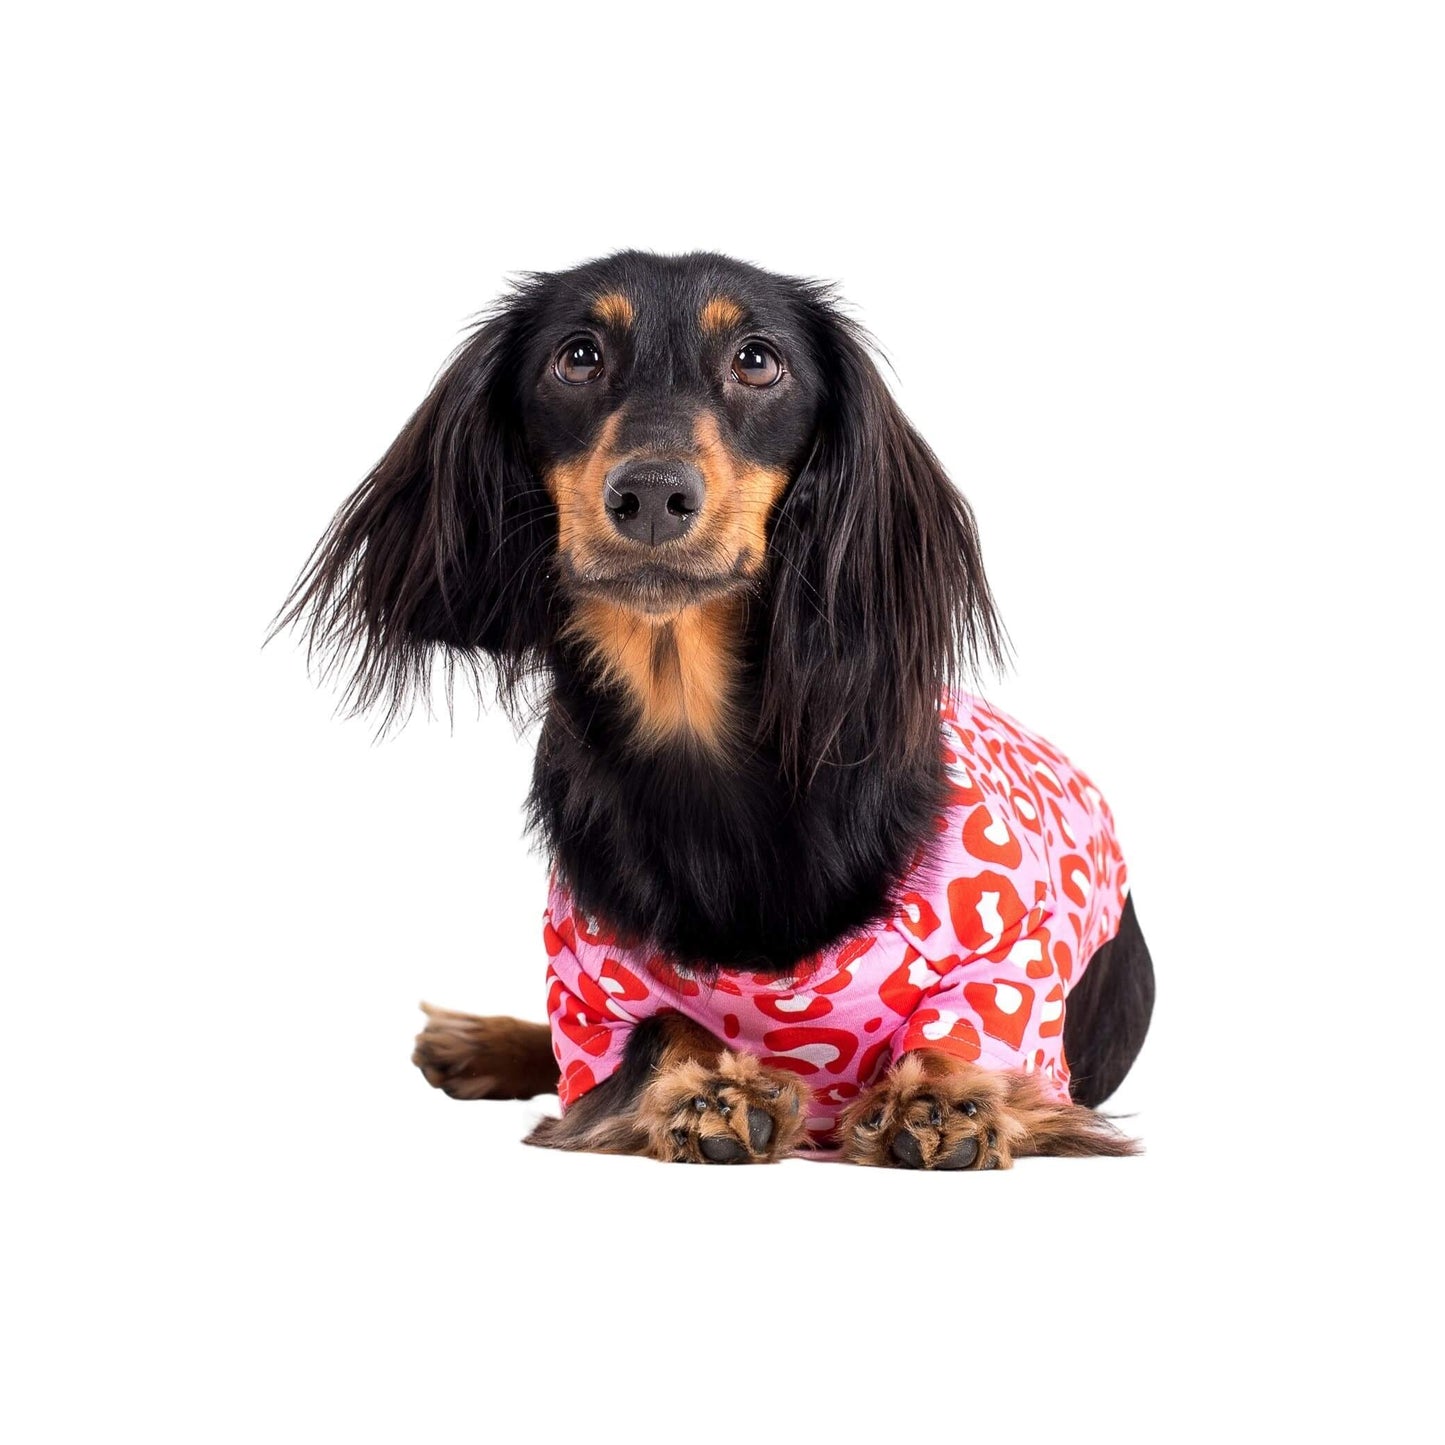 Ellie the Dachshund laying down wearing Vibrant Hounds Fierve in Pink dog shirt. The shirt is a red and pink leopard print.